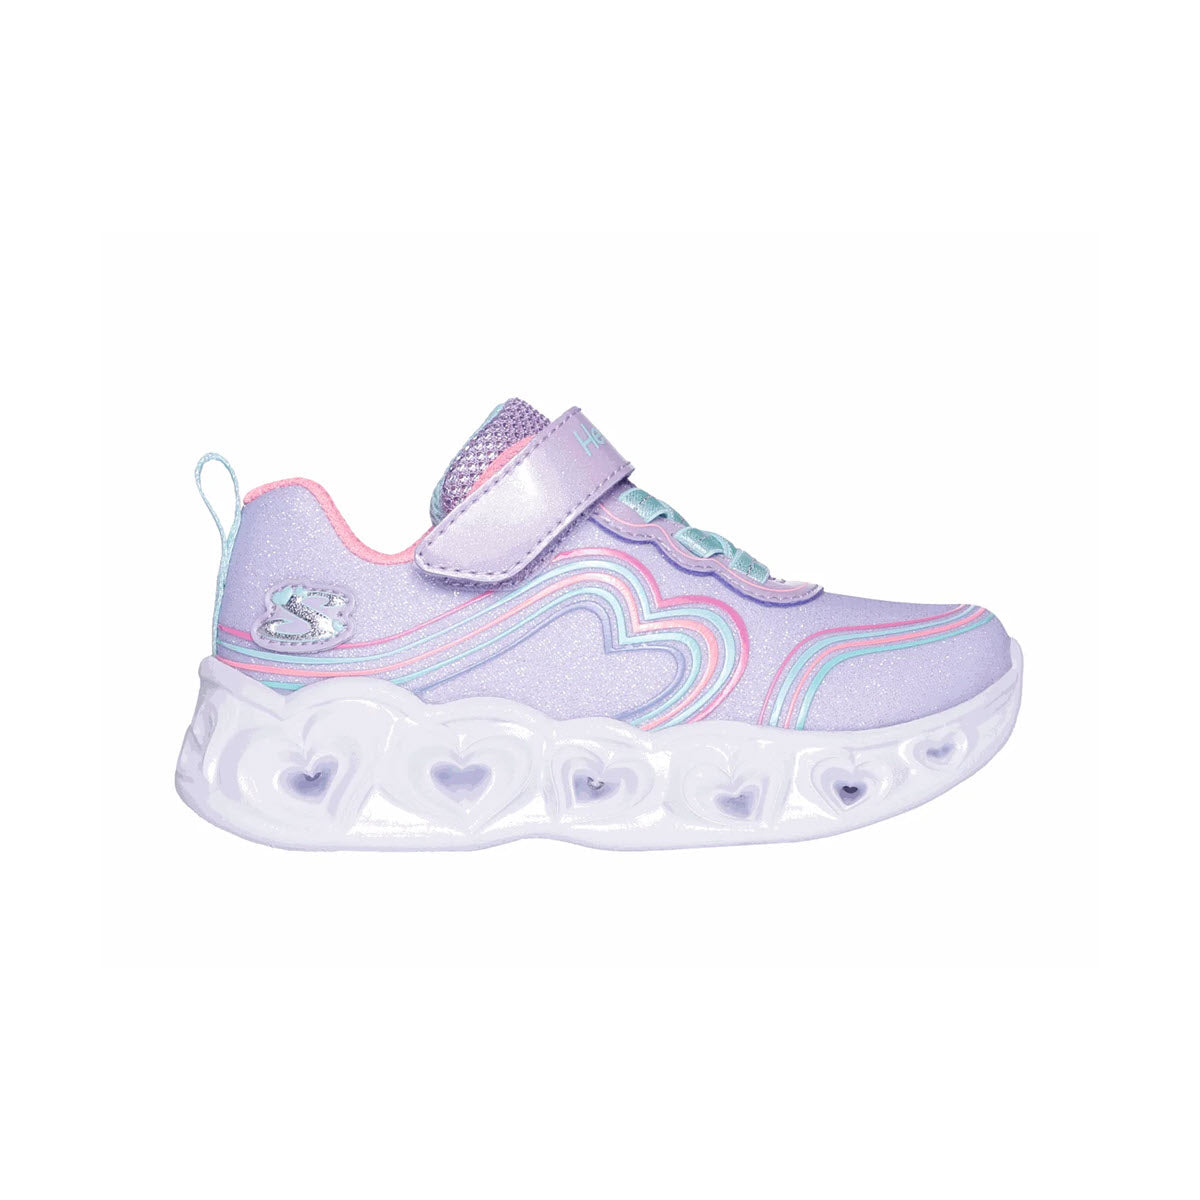 A child's sneaker by Skechers Heart Lights Retro Hearts Lavender Multi - Kids in pastel colors with velcro straps and a cushioned sole.